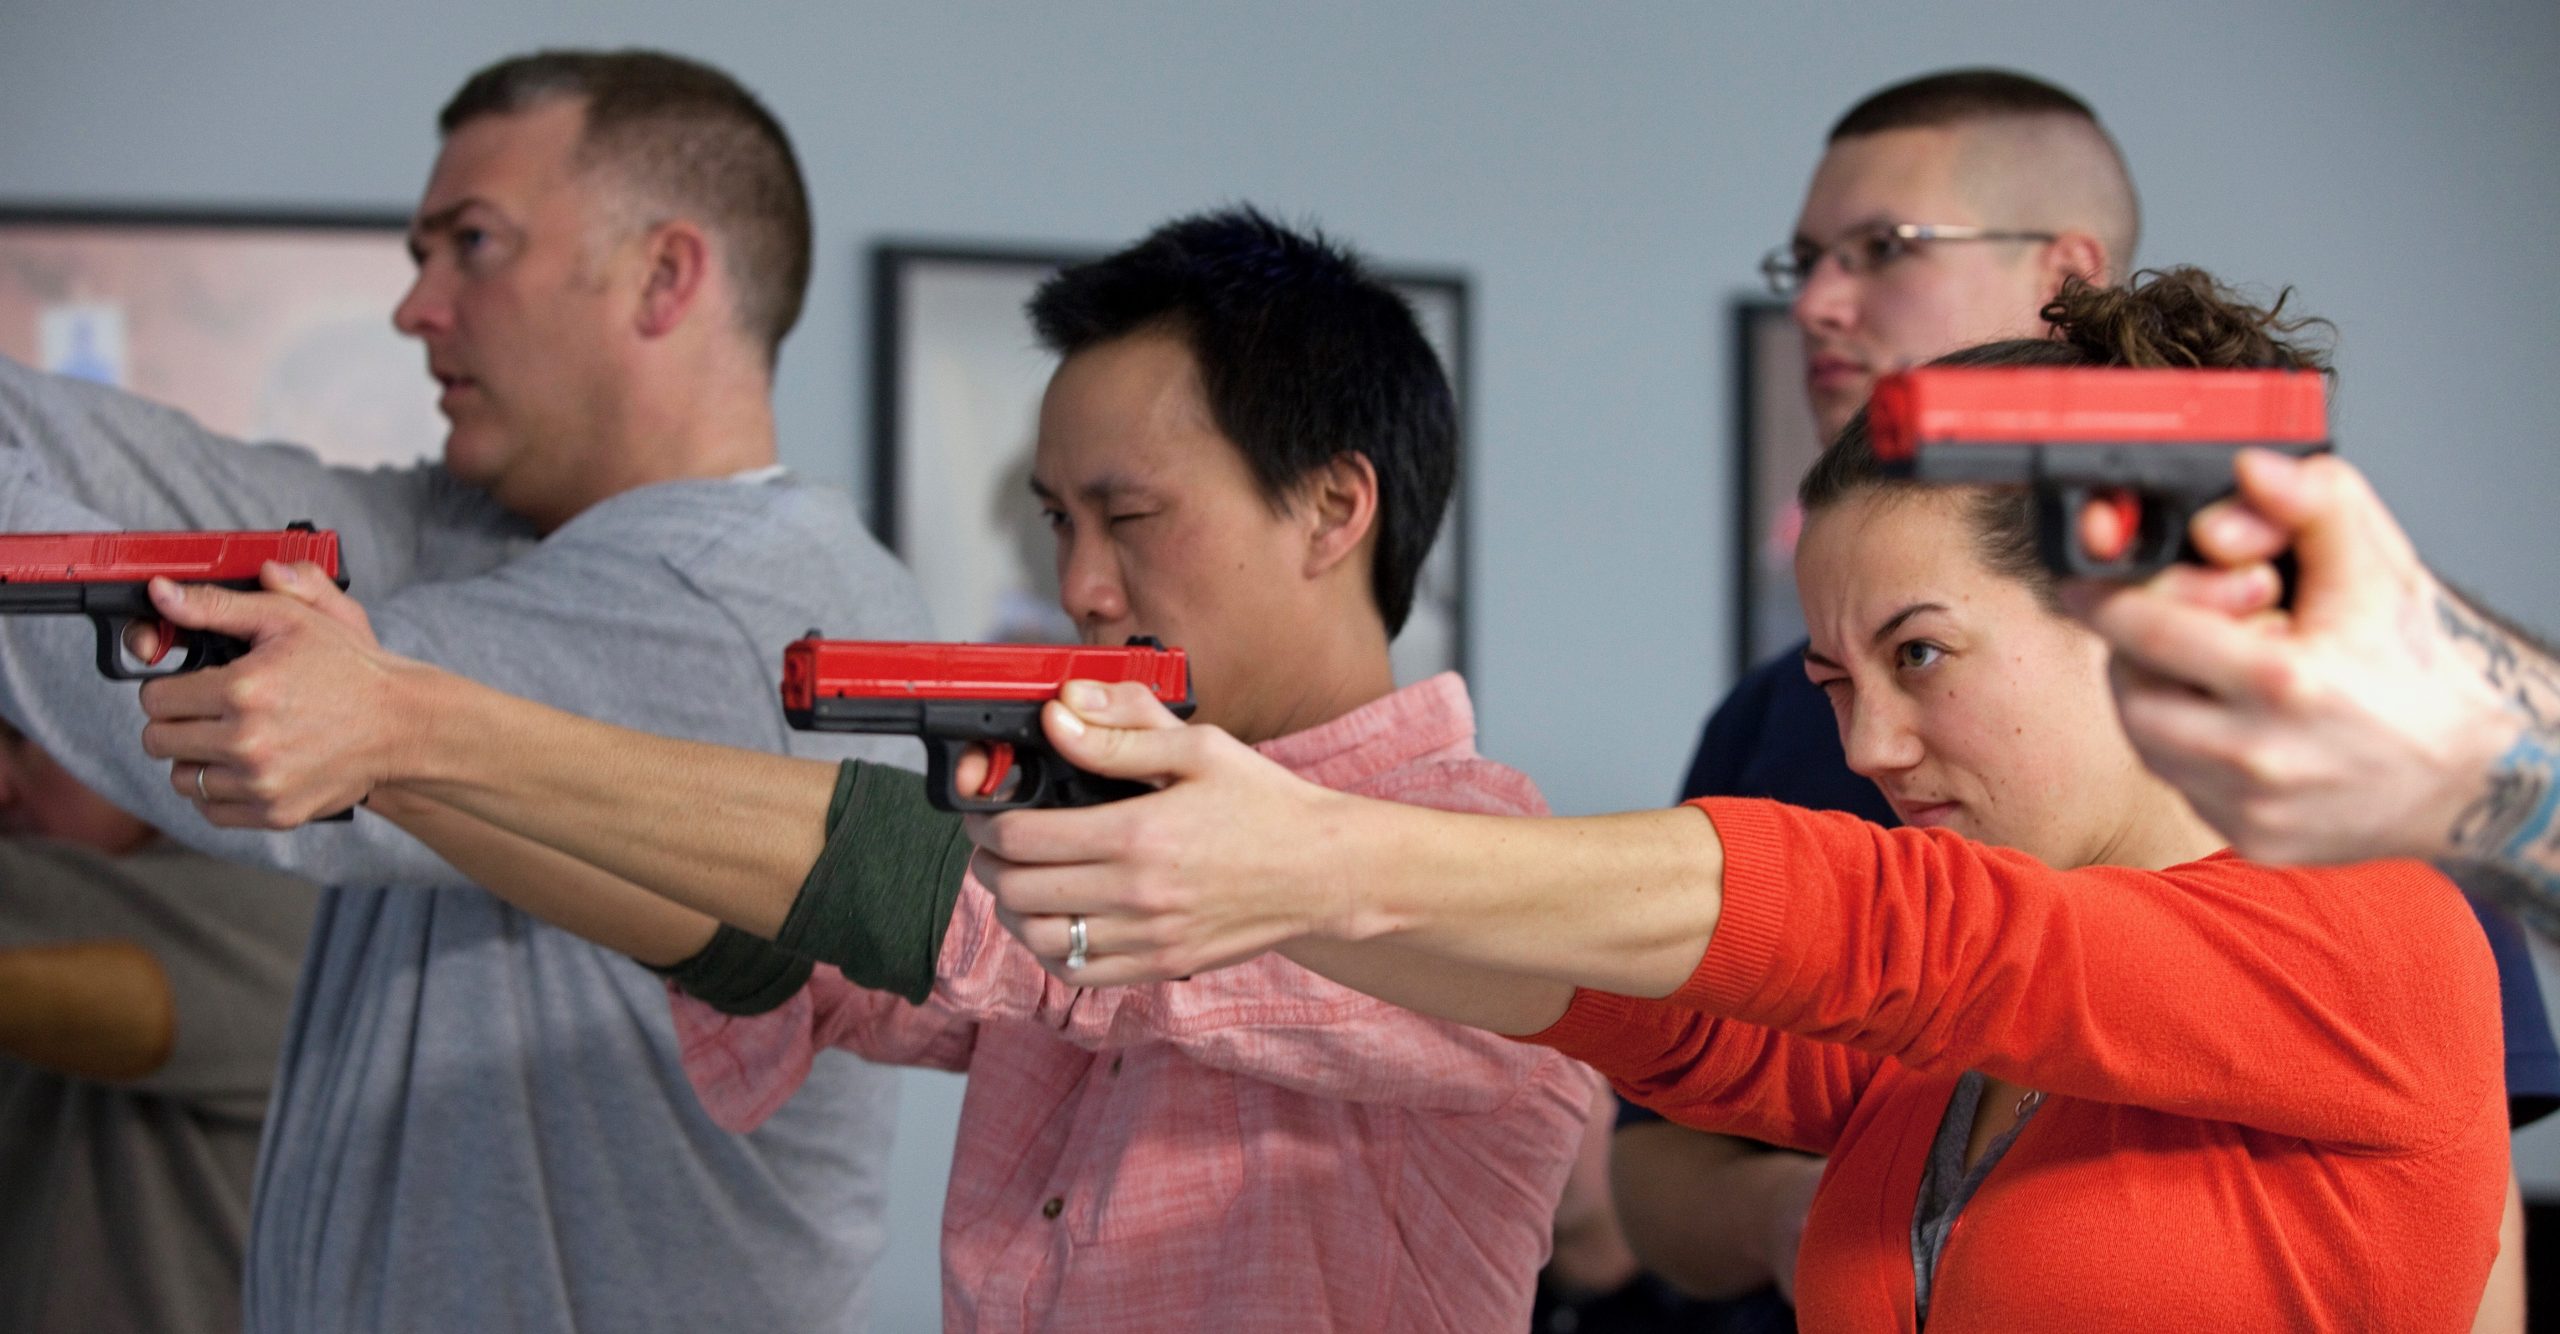 4 Out Of 10 Self Defense Handgun Owners Have Received No Formal Firearms Training